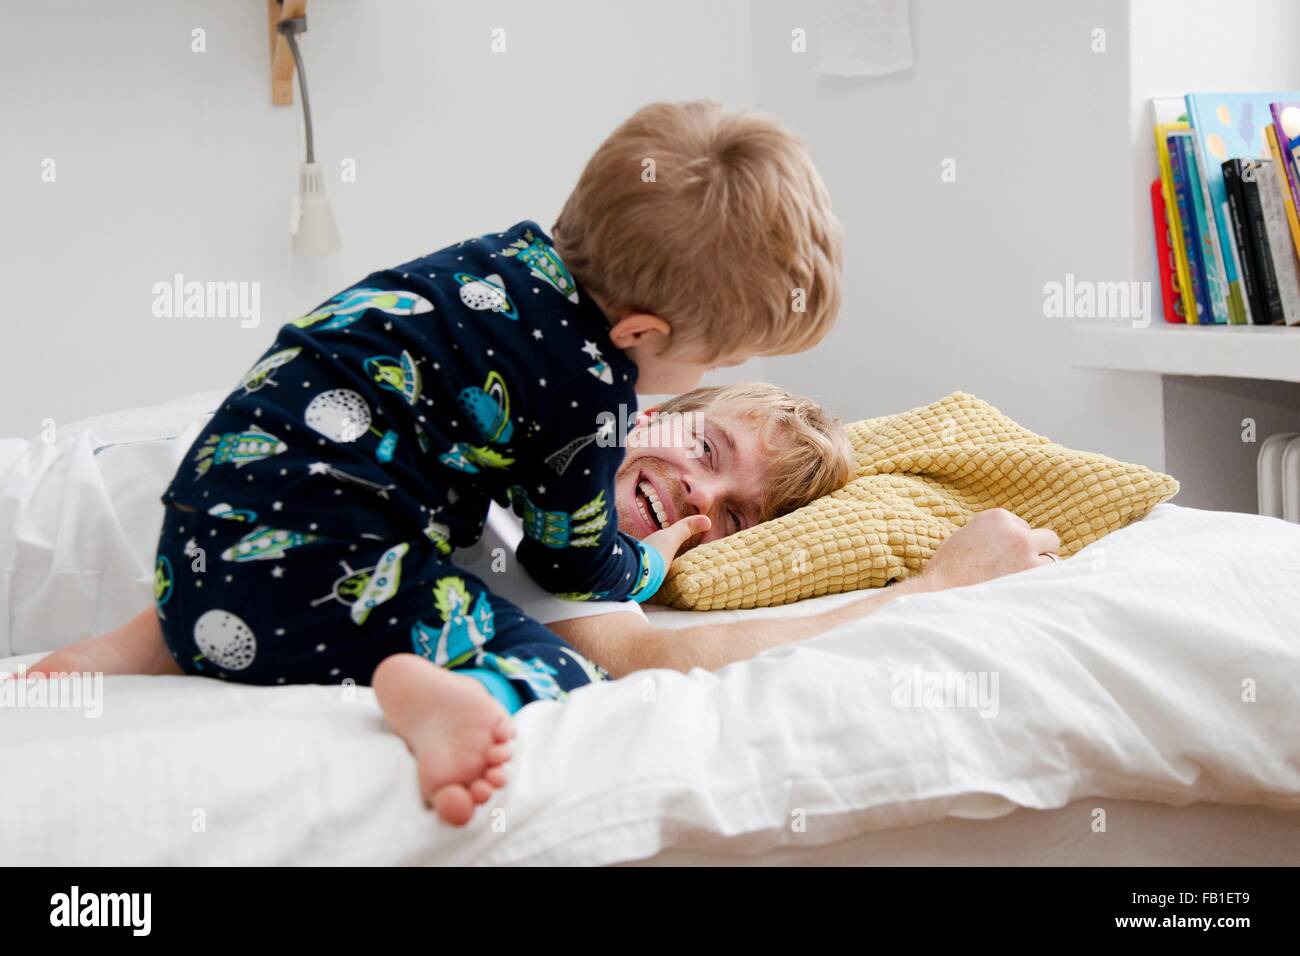 Young boy waking up father n bed Stock Photo